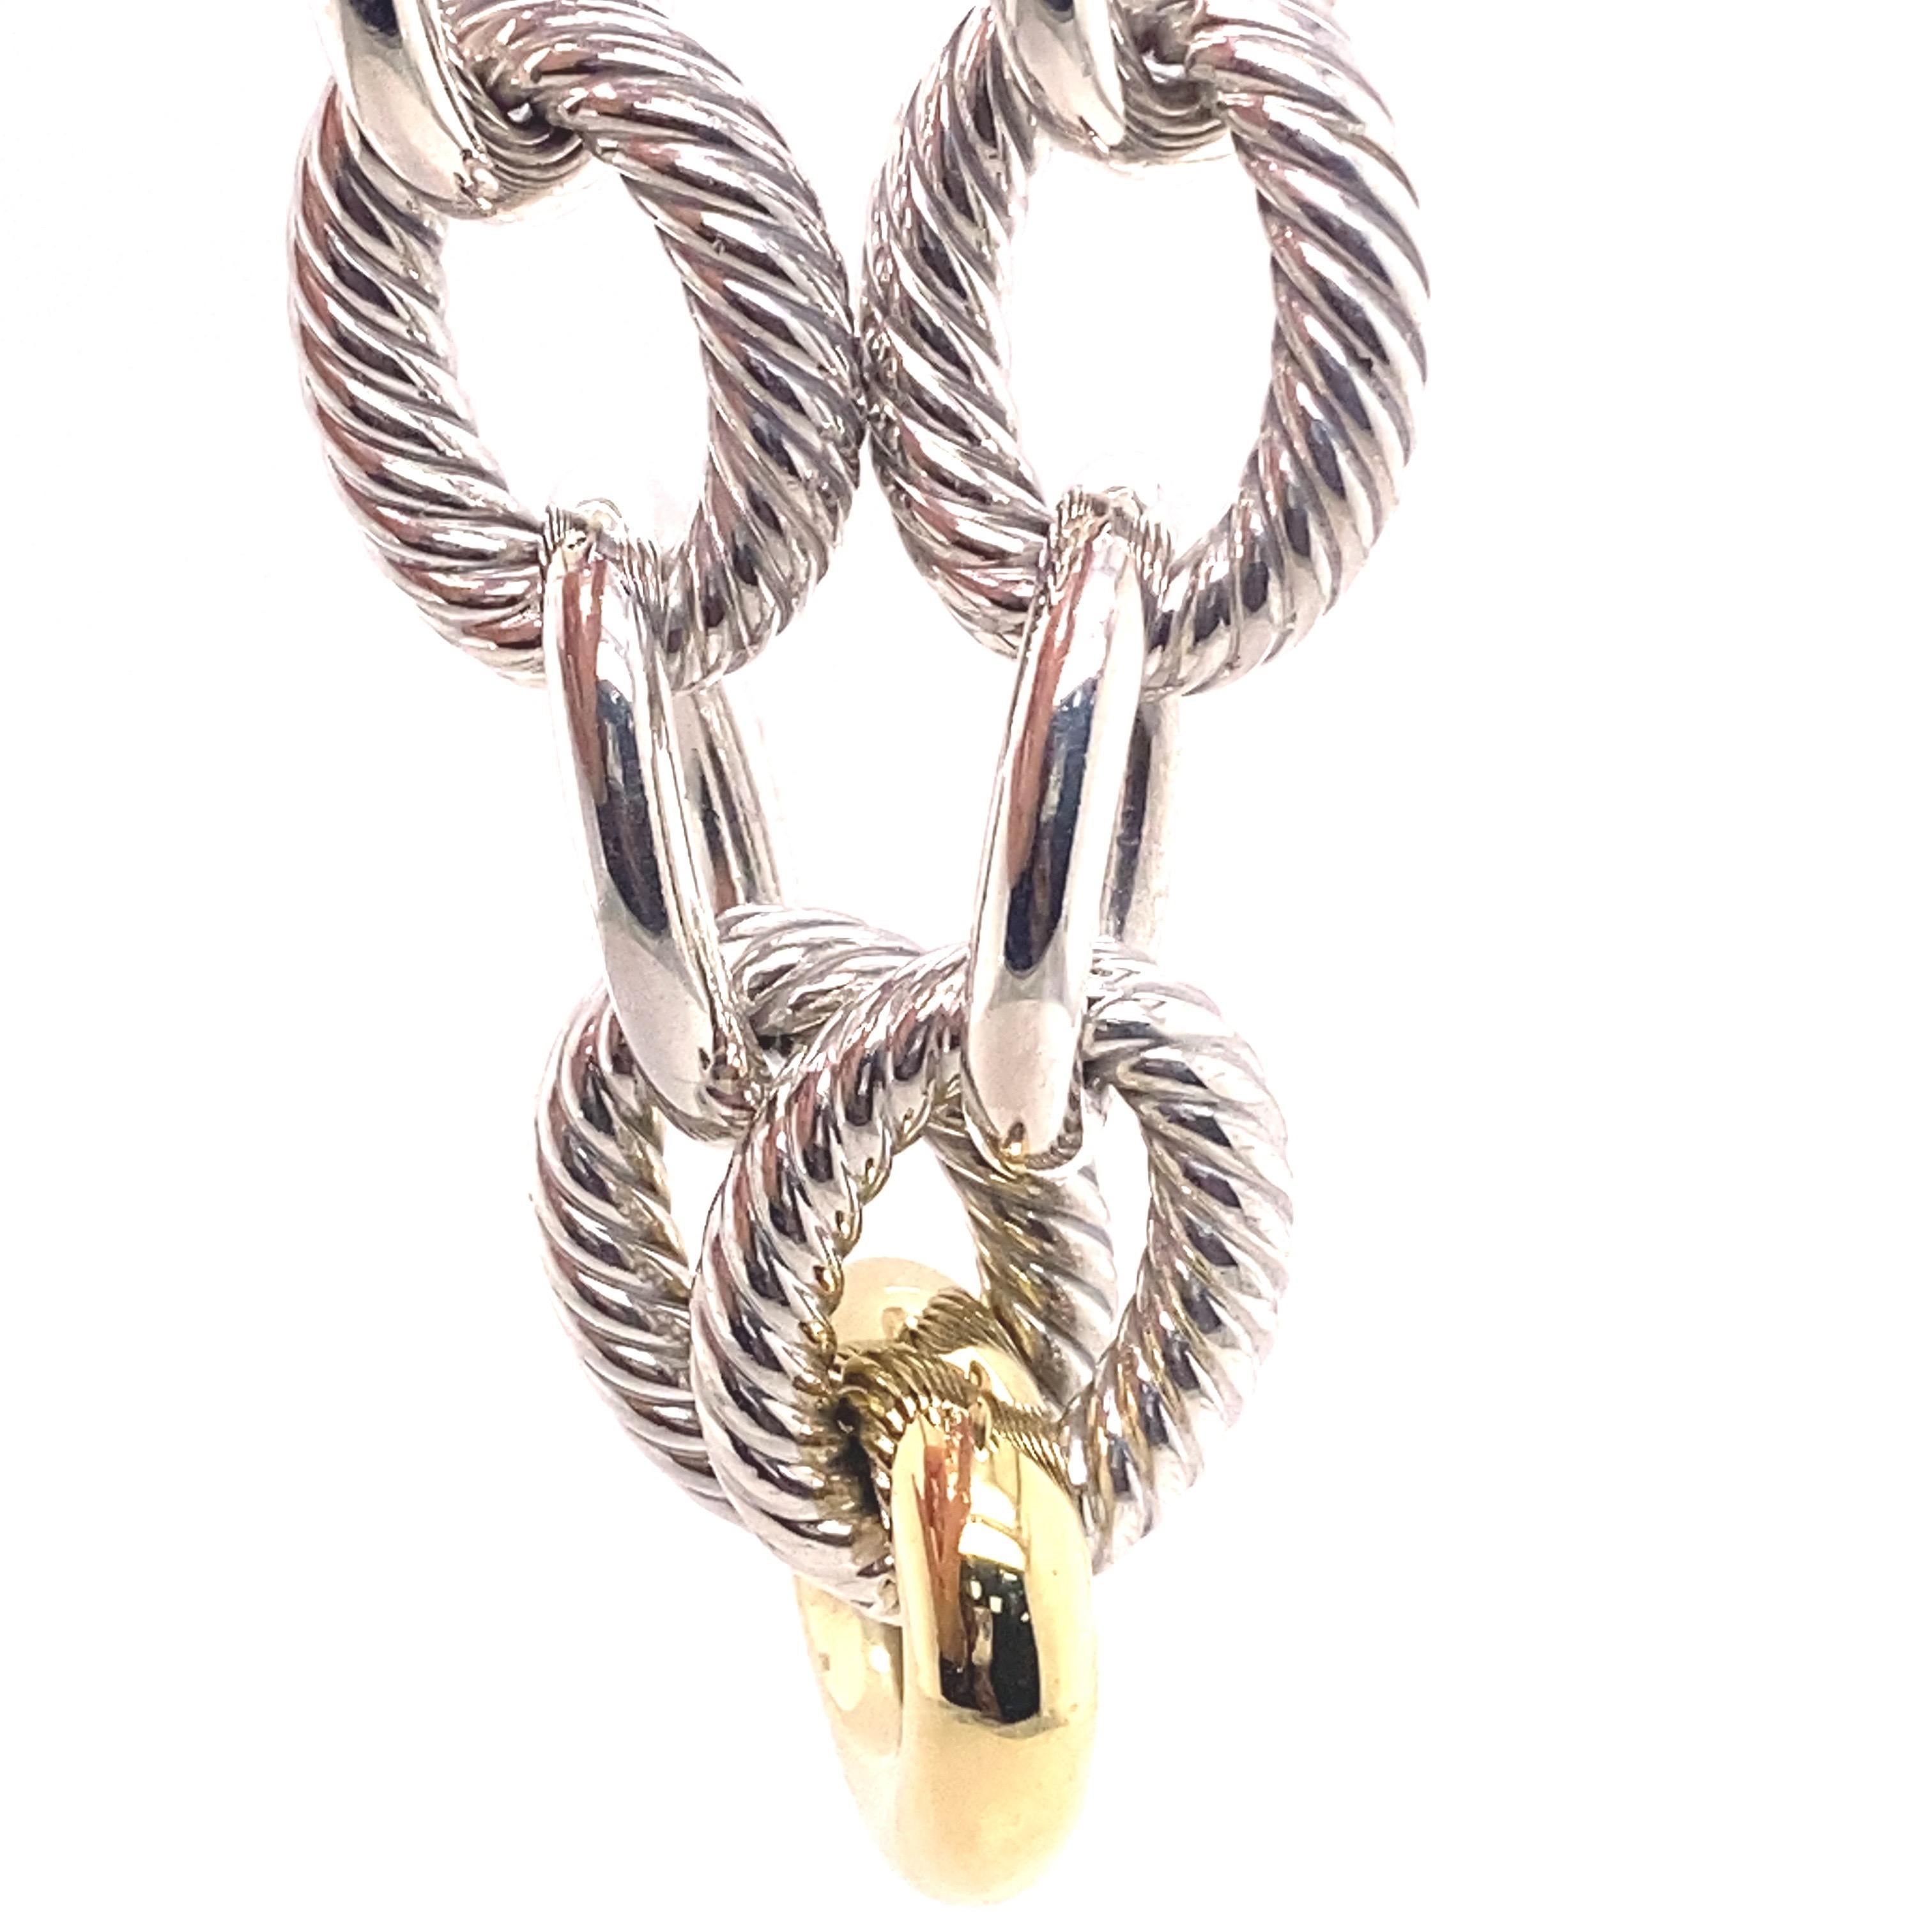 David Yurman Madison XL Oval Link Cable Bracelet
Style:   Oval Link 
Metal:   Sterling Silber with 18kt Bonded Yellow Gold
Size:   Extra Large 19.5' MM
Length:  7.5 Inches
Closure:  Cable Push Clasp
Style Code:  BC0287S8
Hallmark:  925. 1/4